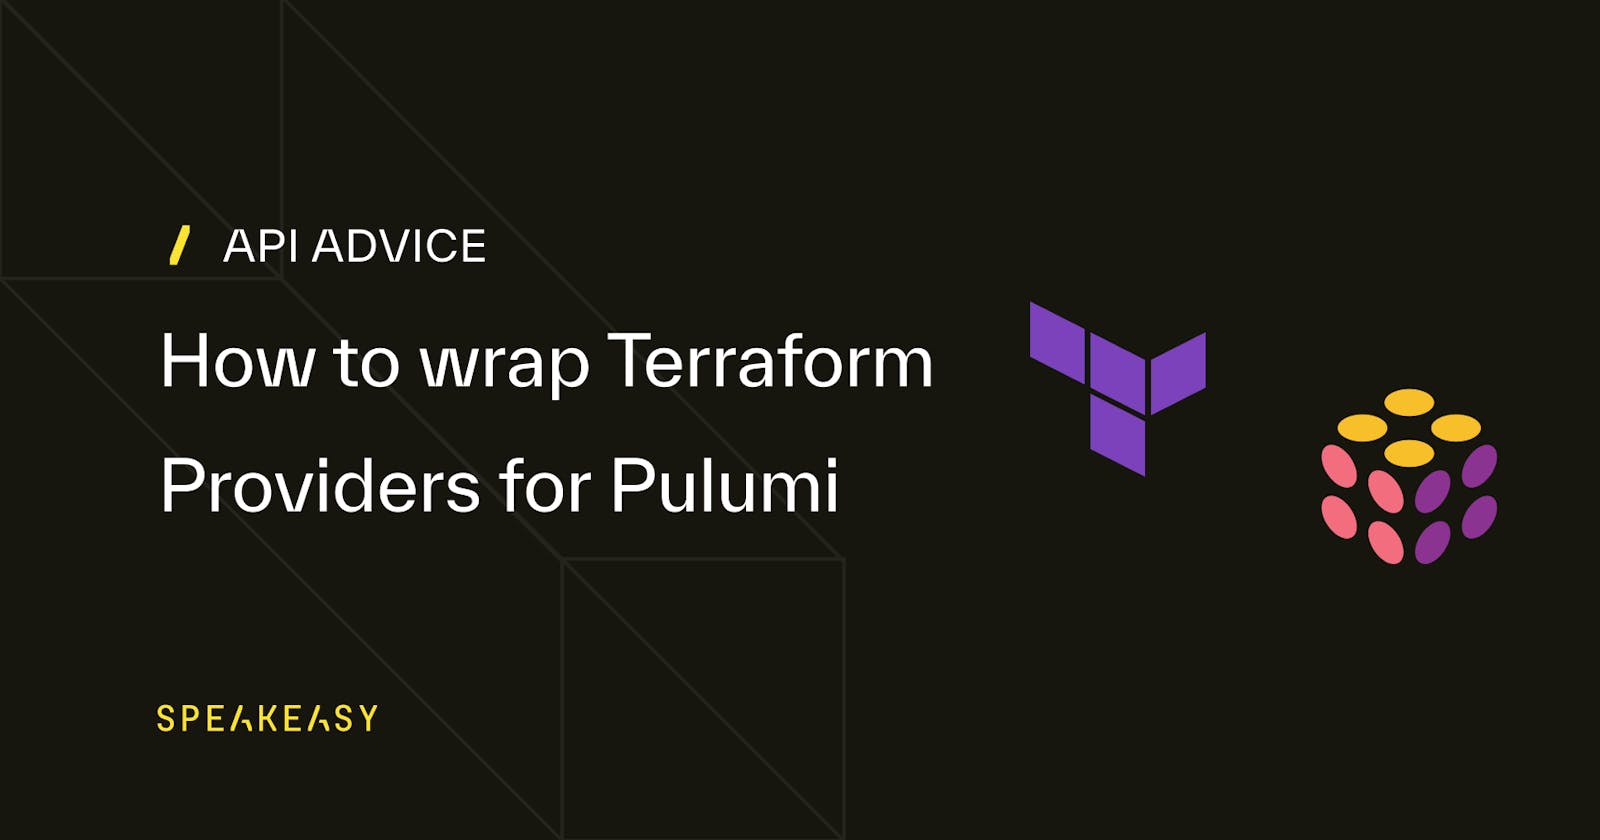 How to Wrap Your Terraform Provider for Pulumi